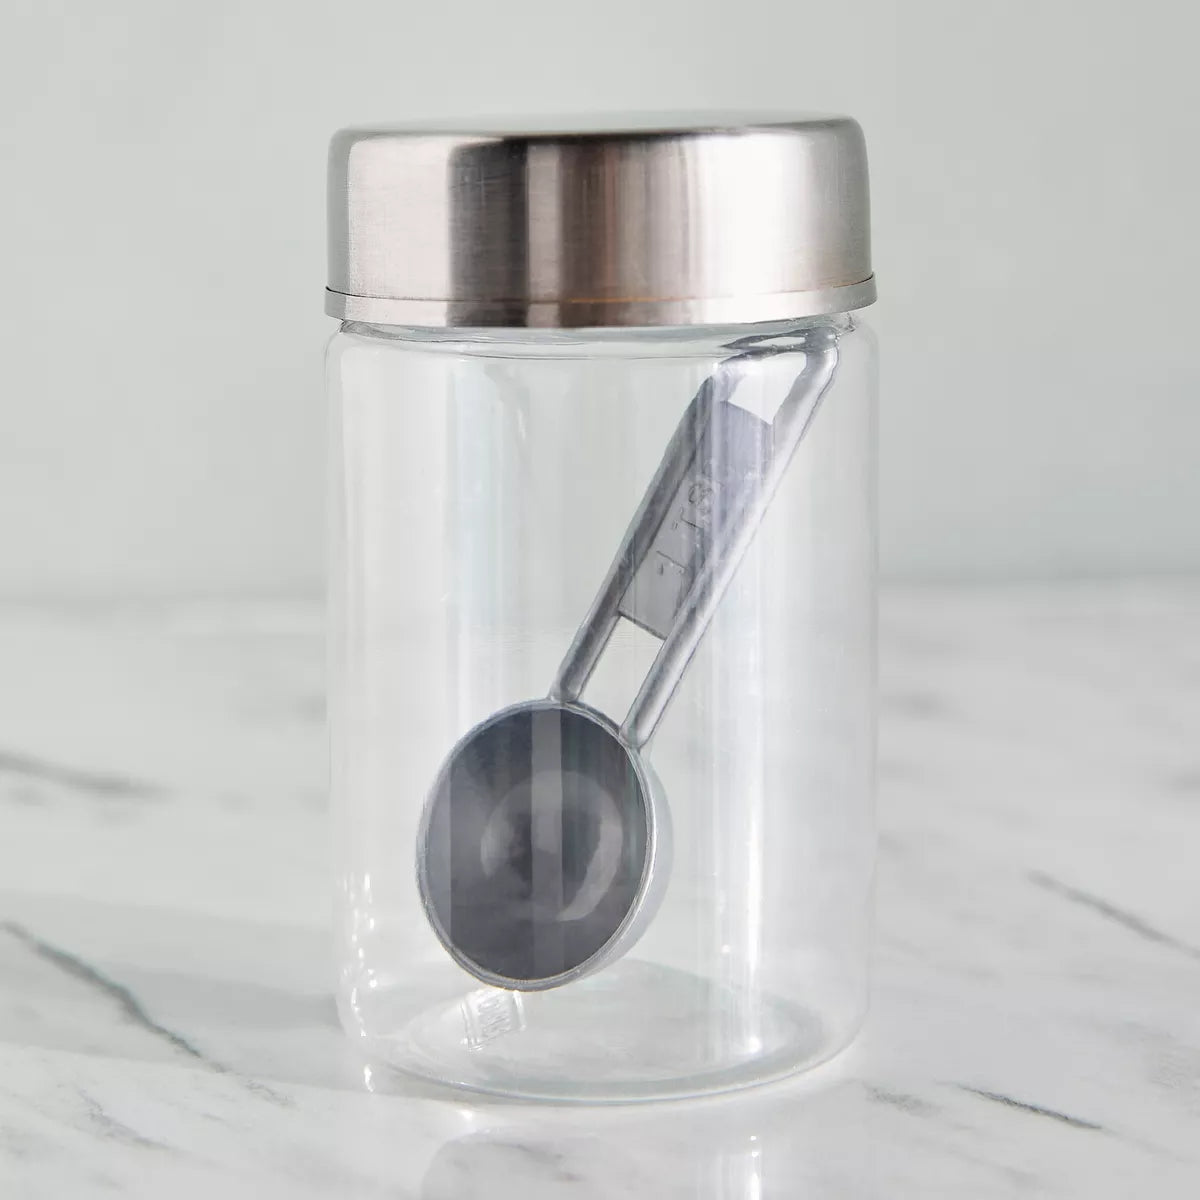 Steelo Canister with Steel Lid - 170 ml